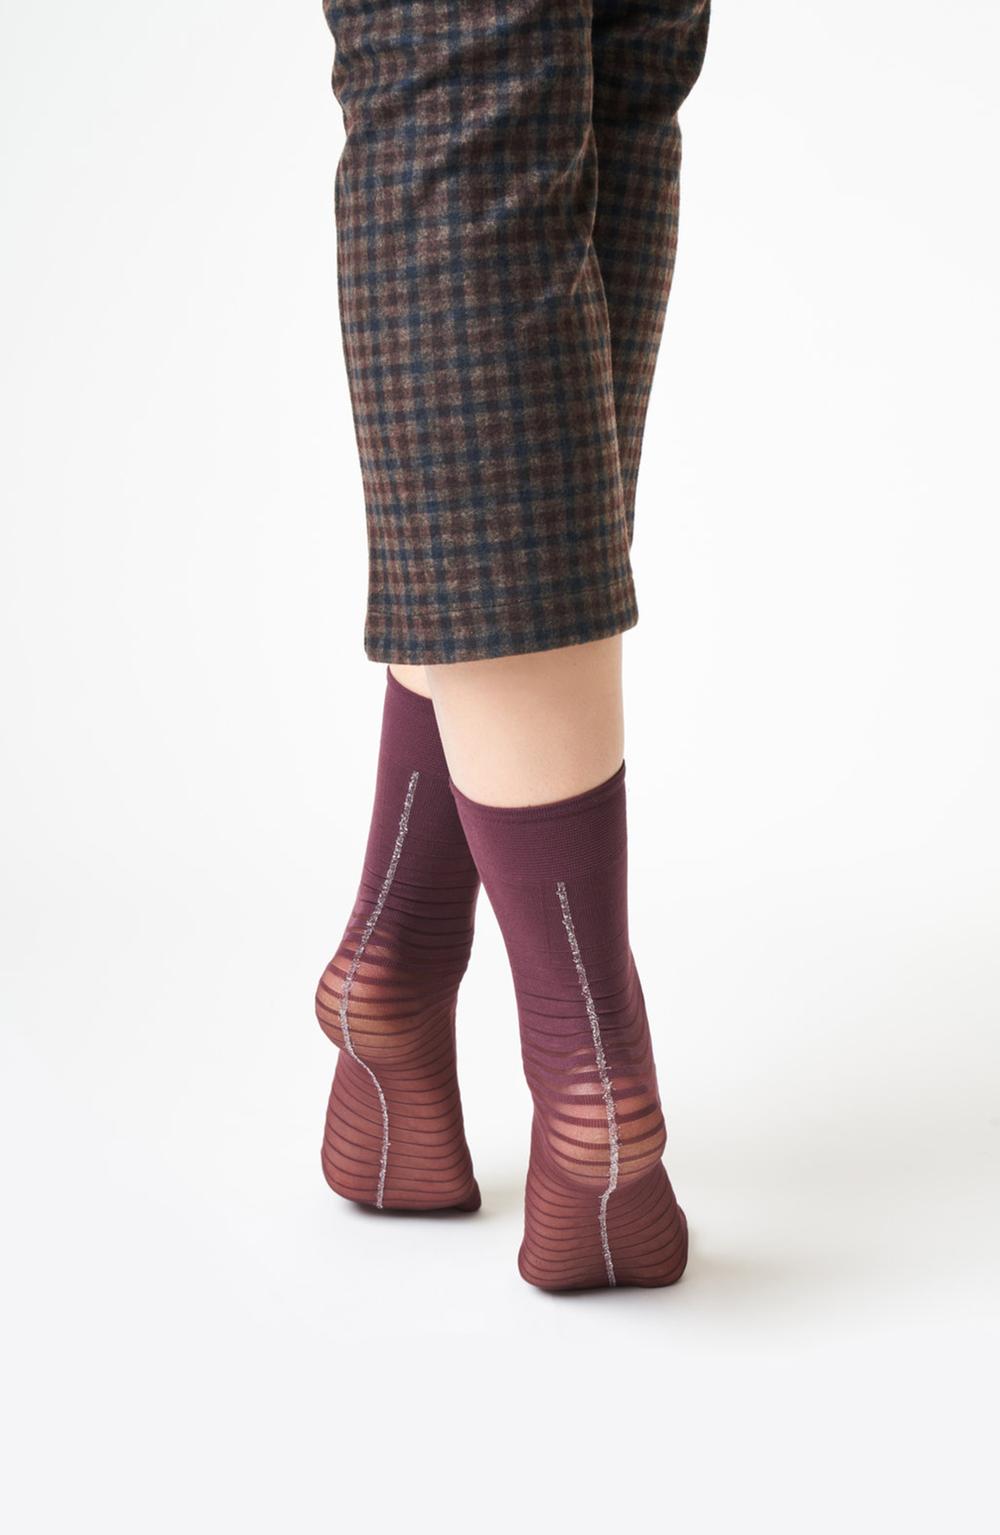 SiSi Degrade Calzino - Wine semi opaque fashion ankle socks with horizontal opaque stripes, sparkly silver metallized back seam detail and deep comfort cuff.